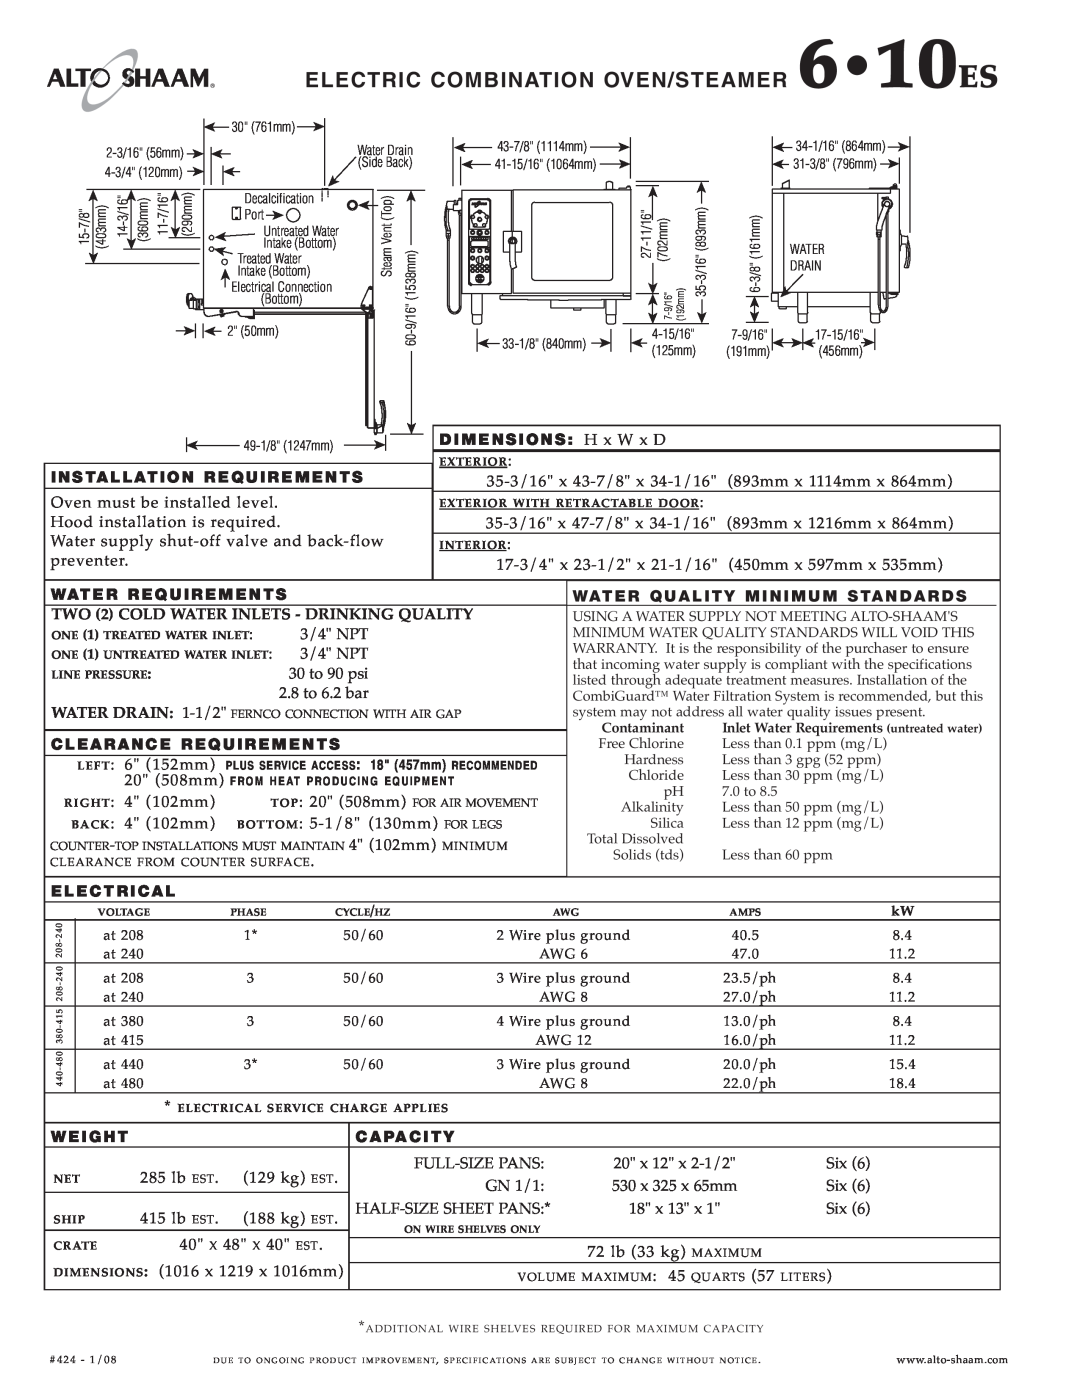 Alto-Shaam specifications ELECT RIC COMBIN ATIO N OVEN/ STEAME R 610ES 